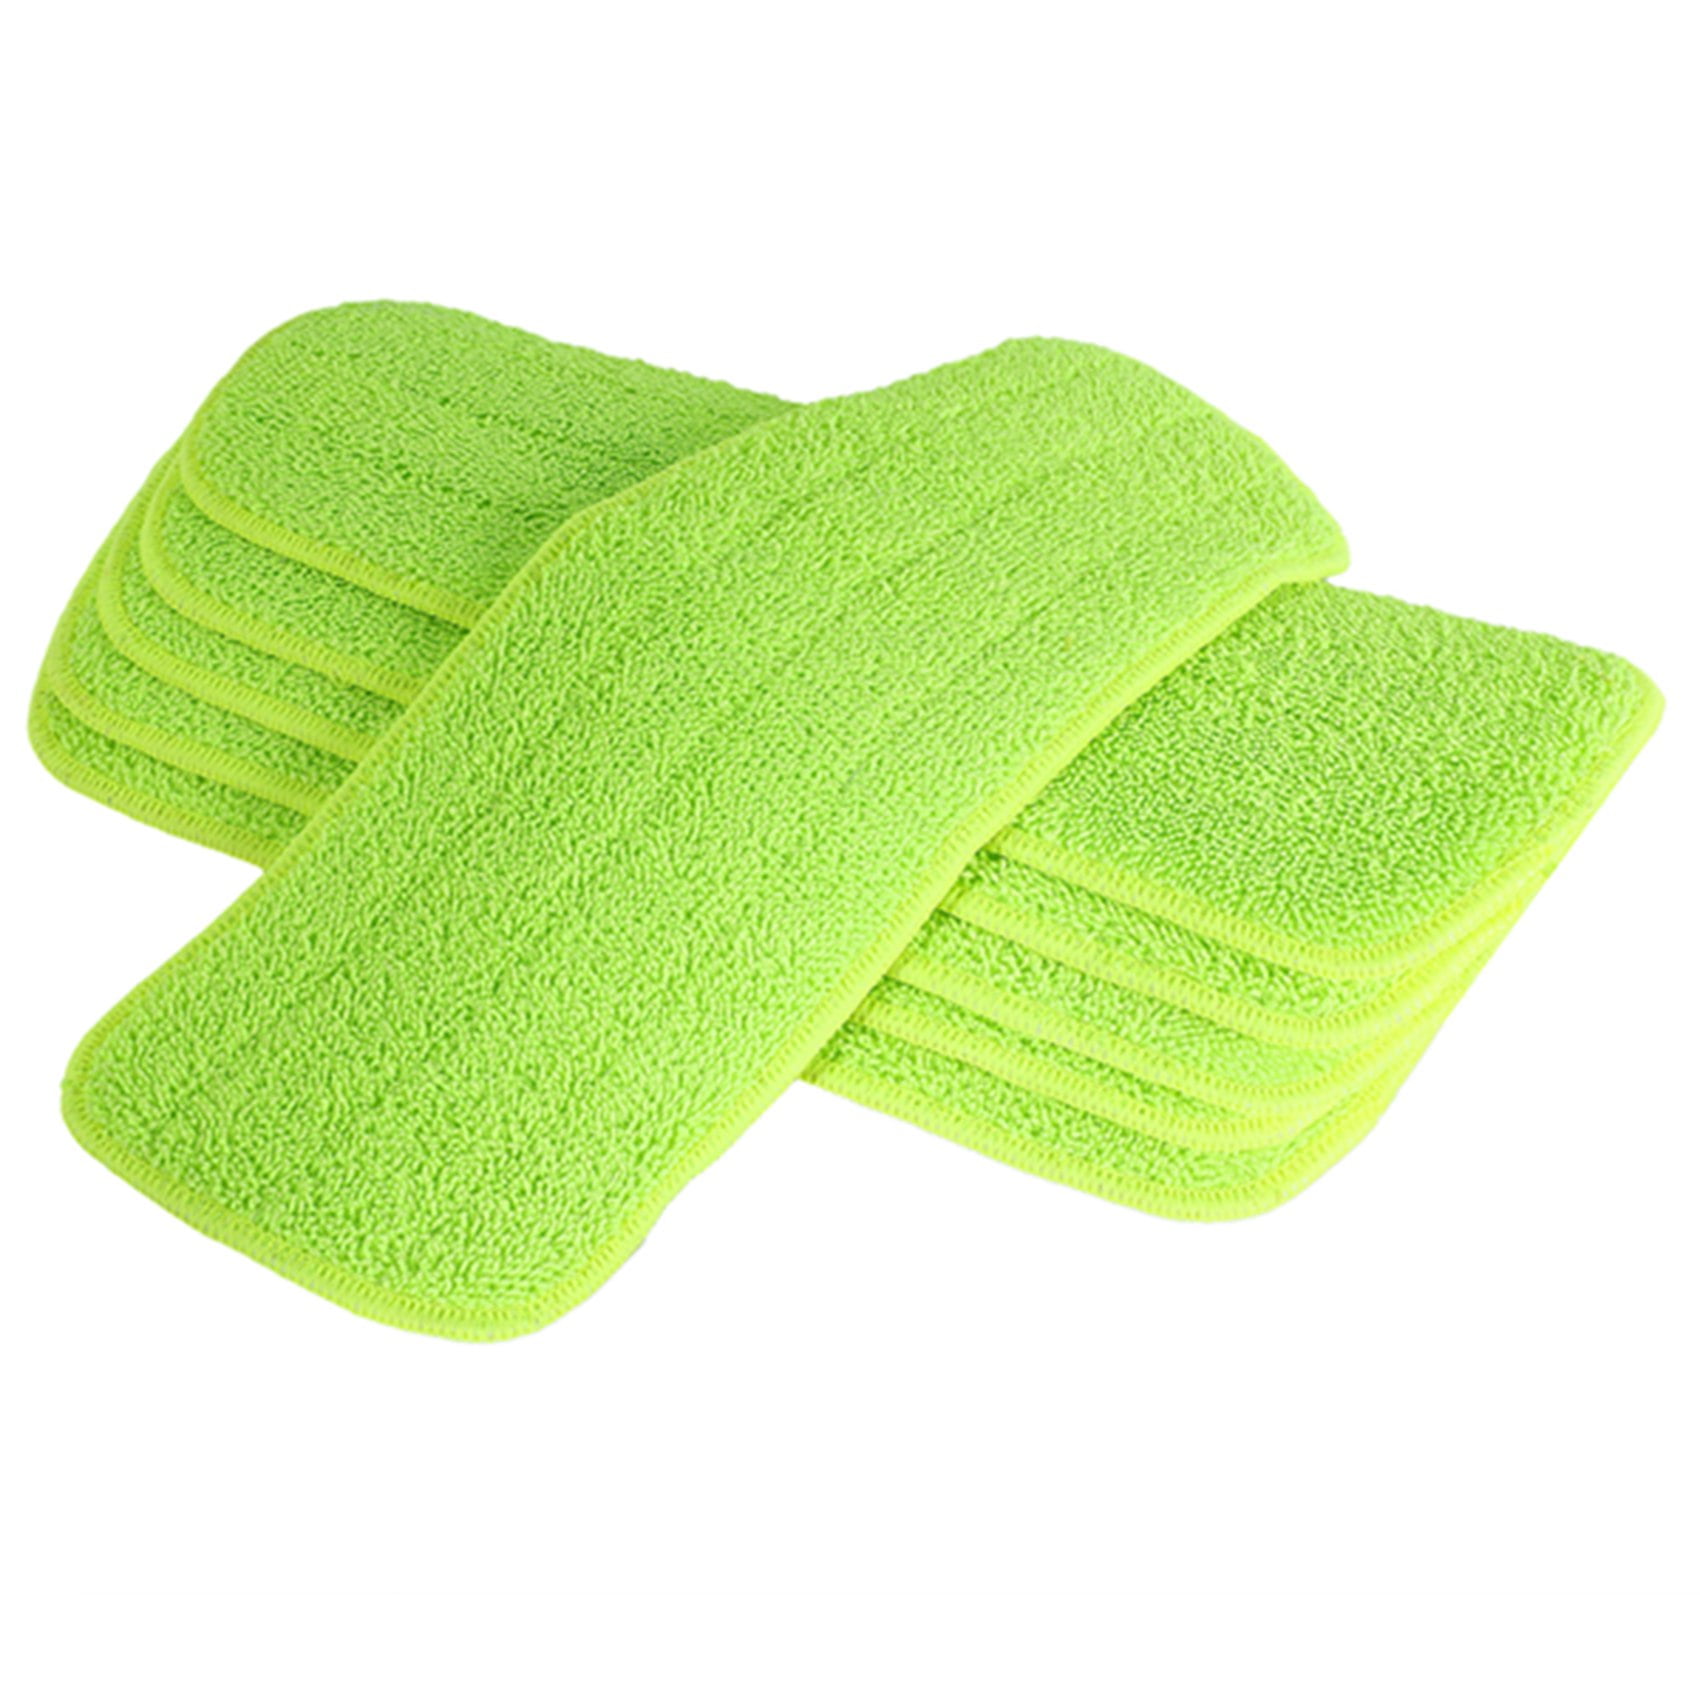 2pcs Replacements Mop Pads Washable For  BISSELL 76B2A 94E9 Steam 